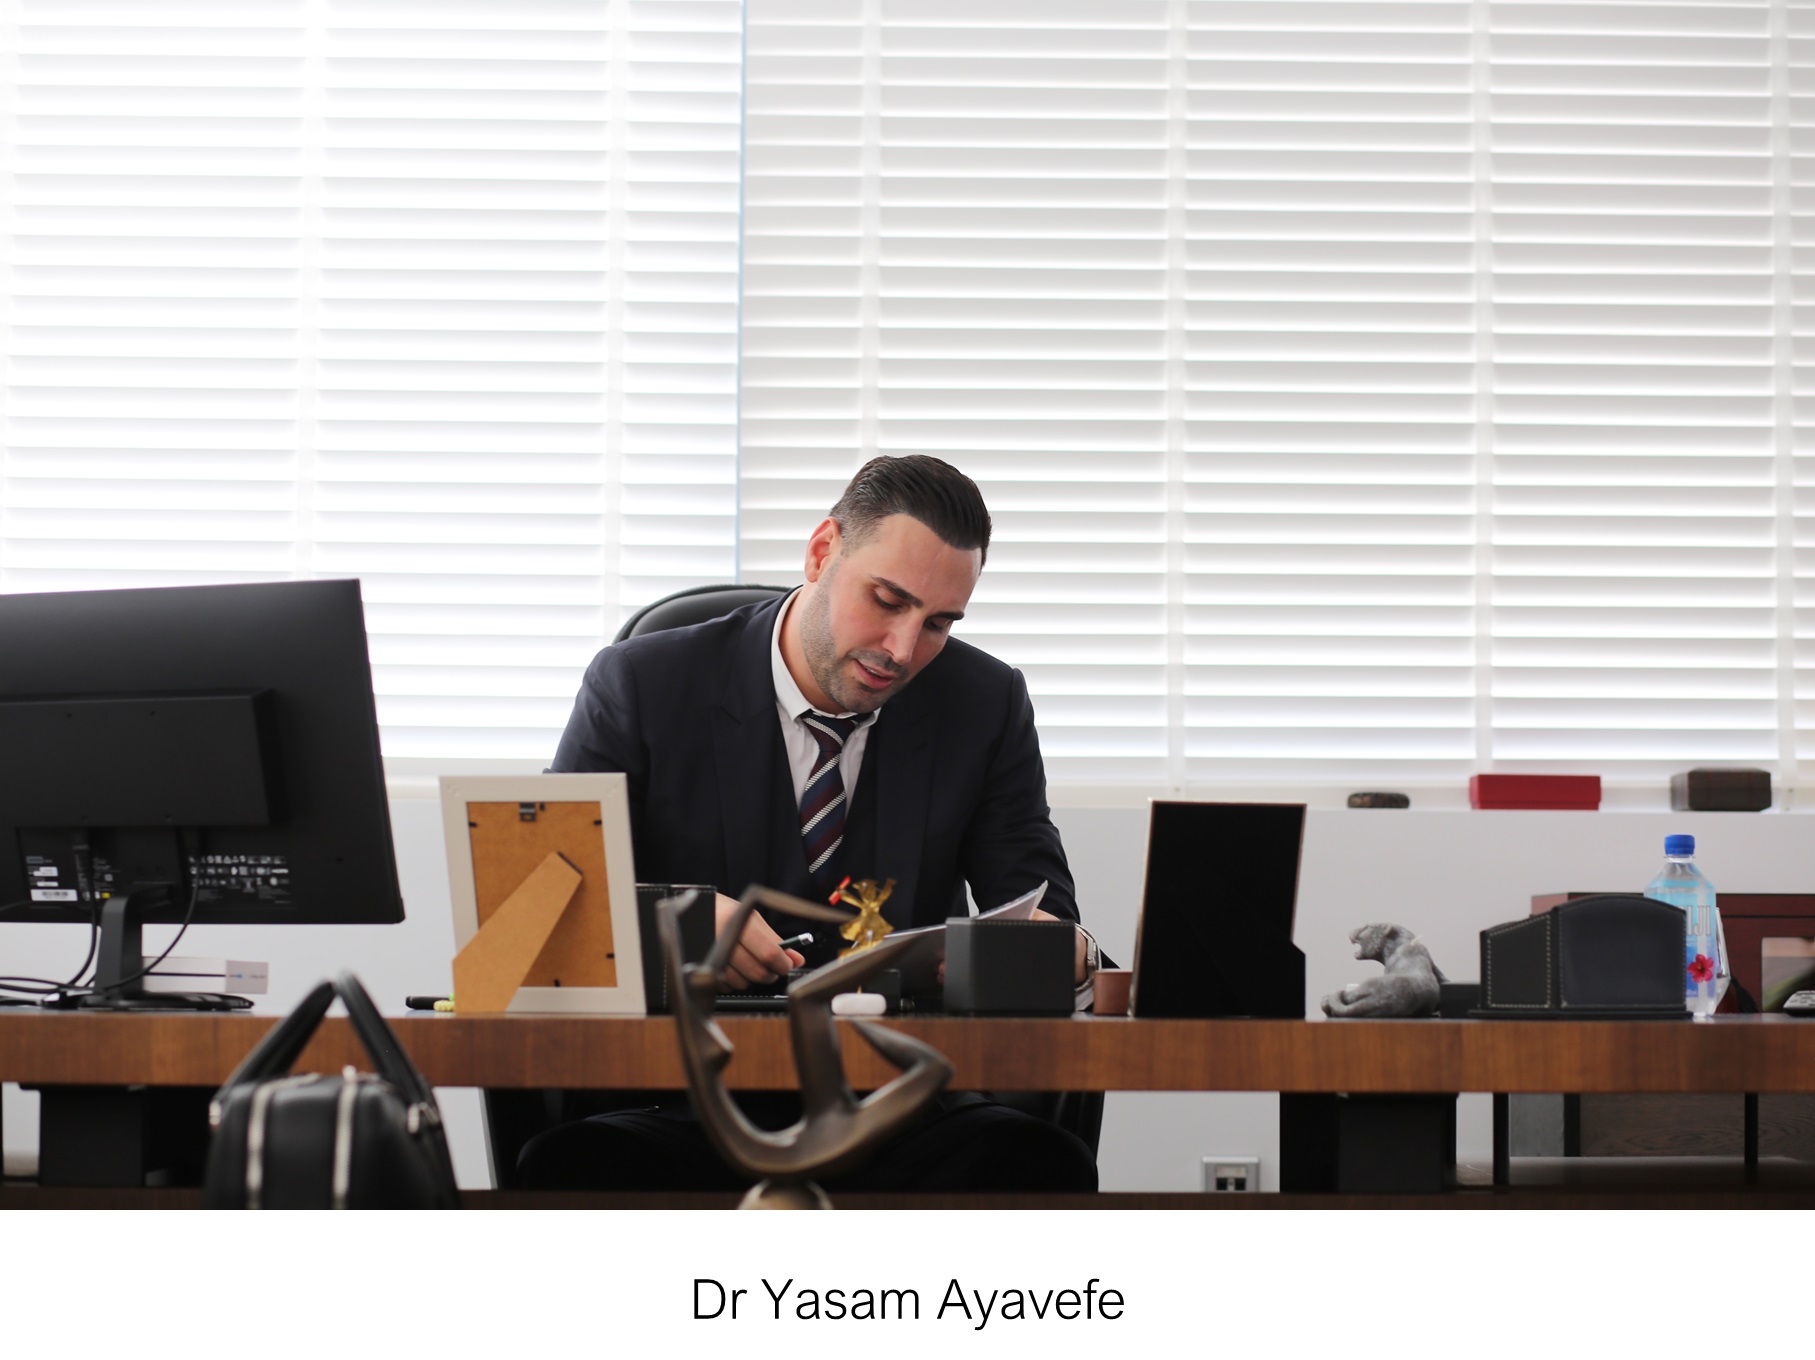 The World Economy Enters a Process Of Transformation, With Dr. Yasam Ayavefe